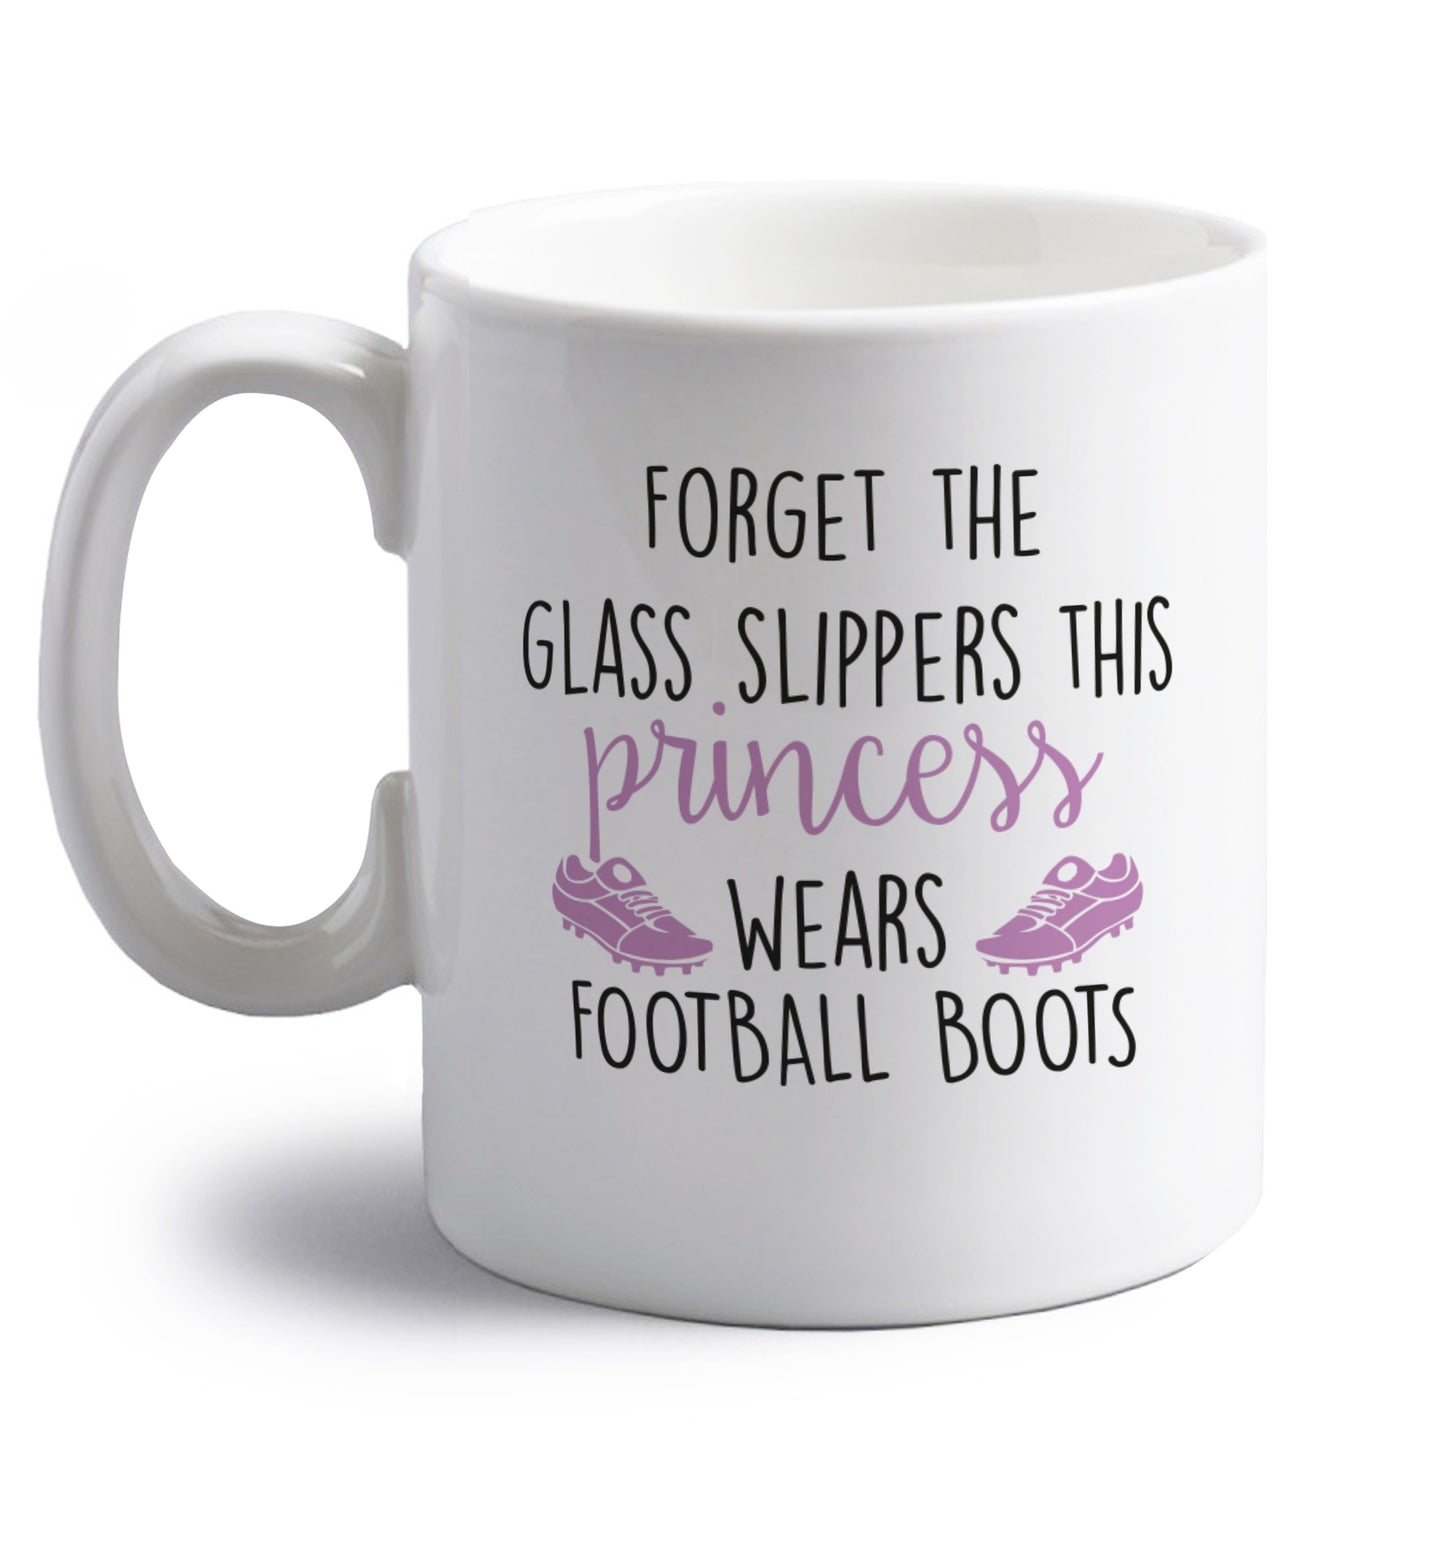 Forget the glass slippers this princess wears football boots right handed white ceramic mug 